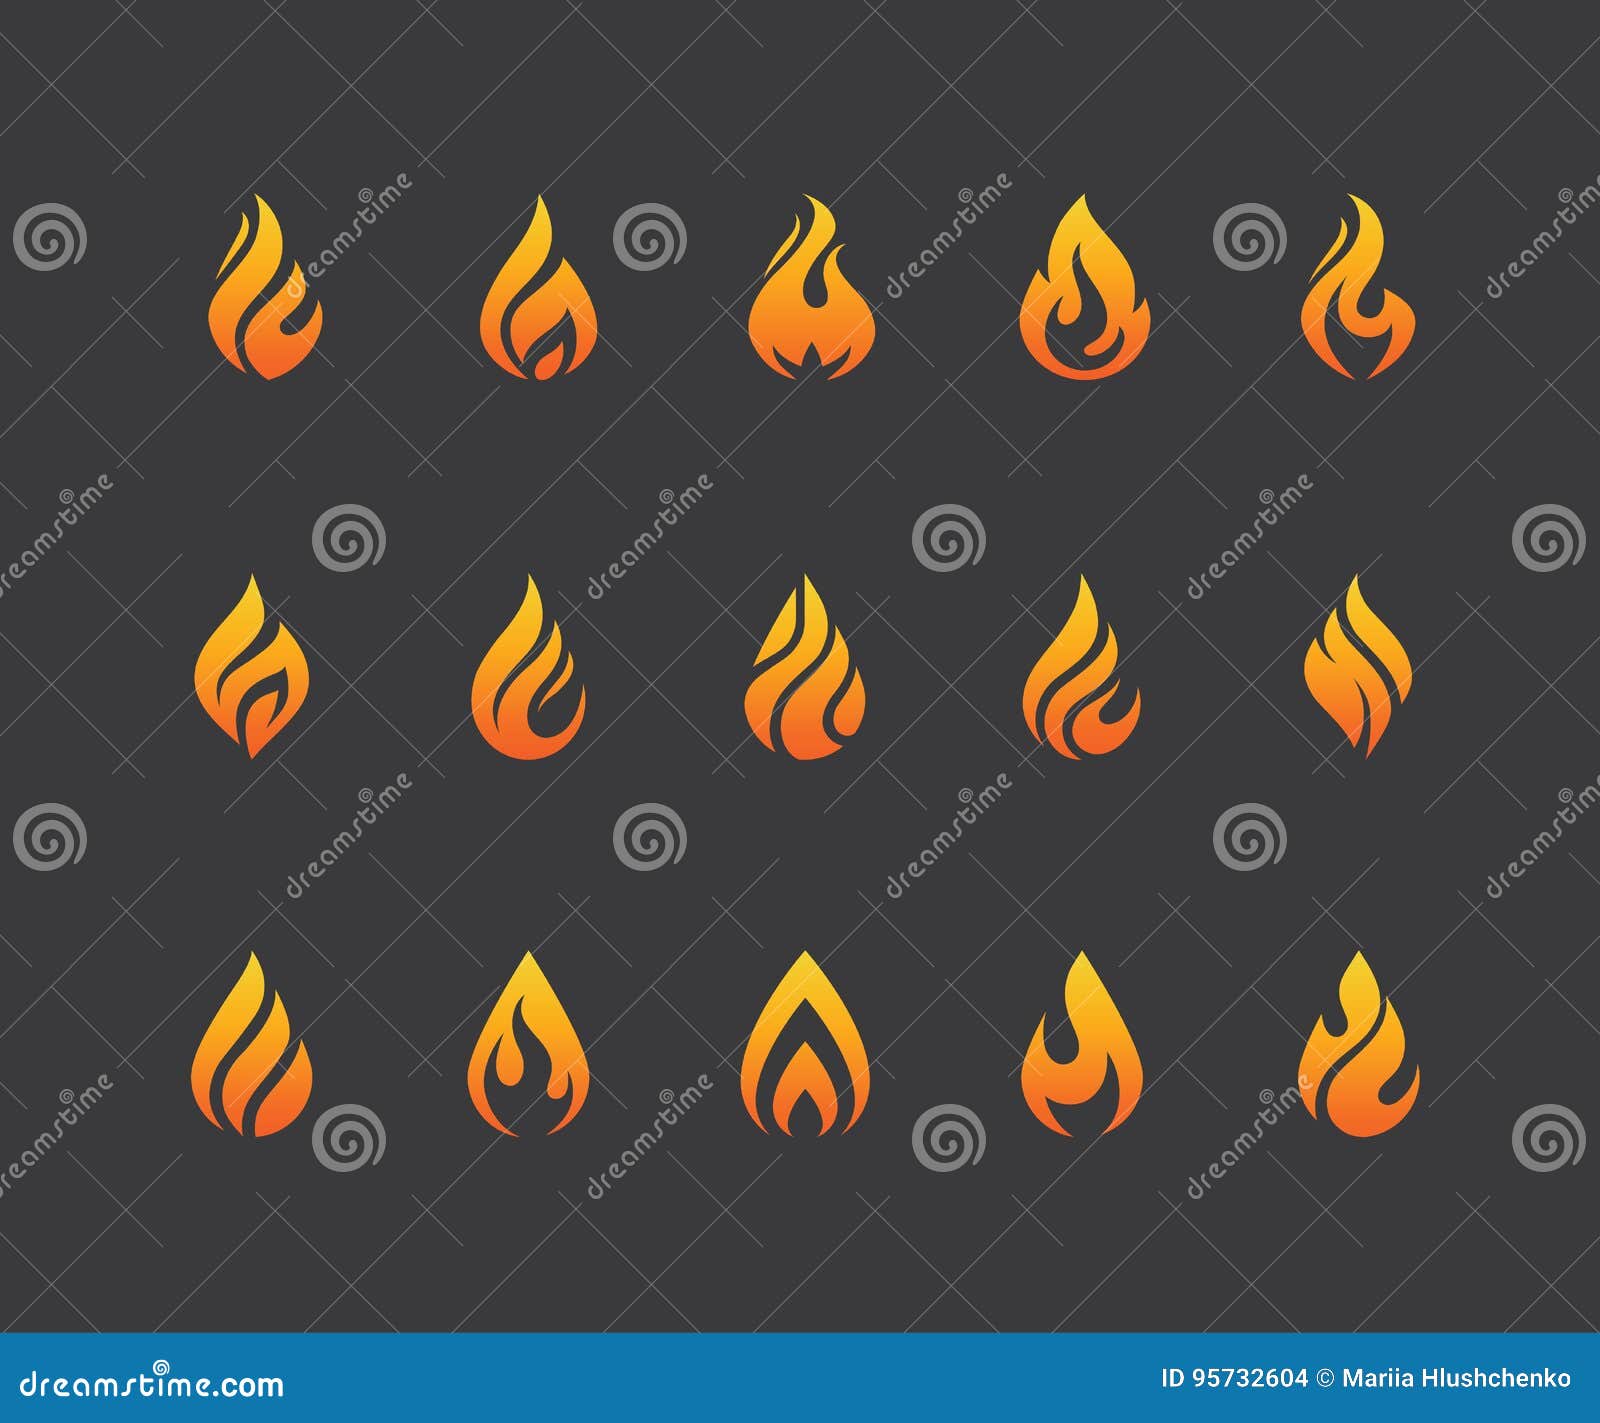 set of fire flame icons and logo  on black background.